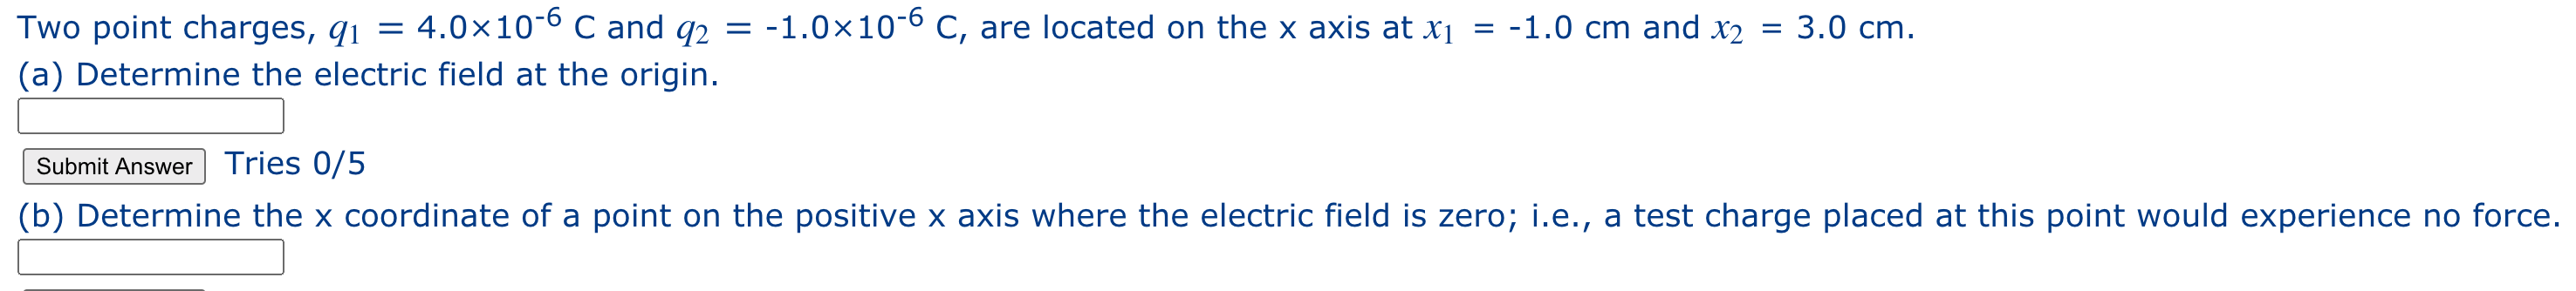 Two point charges, q1 = 4.0×10-6 C and q2 = -1.0×10-6 C, are located on the x axis at x¡ = -1.0 cm and x2
3.0 cm.
(a) Determine the electric field at the origin.
Submit Answer Tries 0/5
(b) Determine the x coordinate of a point on the positive x axis where the electric field is zero; i.e., a test charge placed at this point would experience no force.
